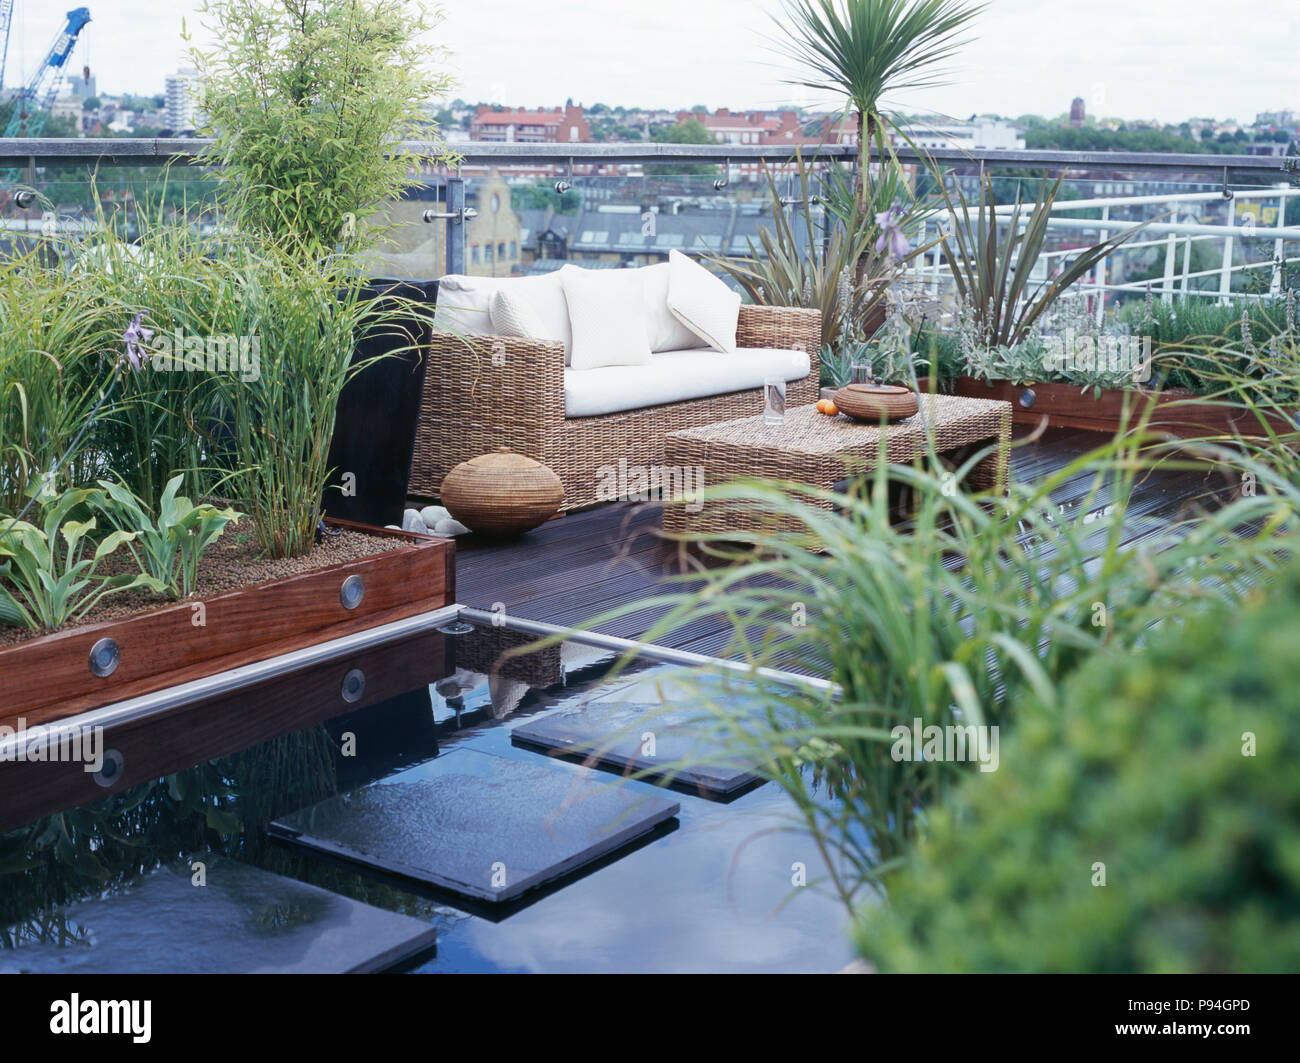 Paving slabs across pool on decked city roof garden with raised beds and seagrass table and sofa Stock Photo